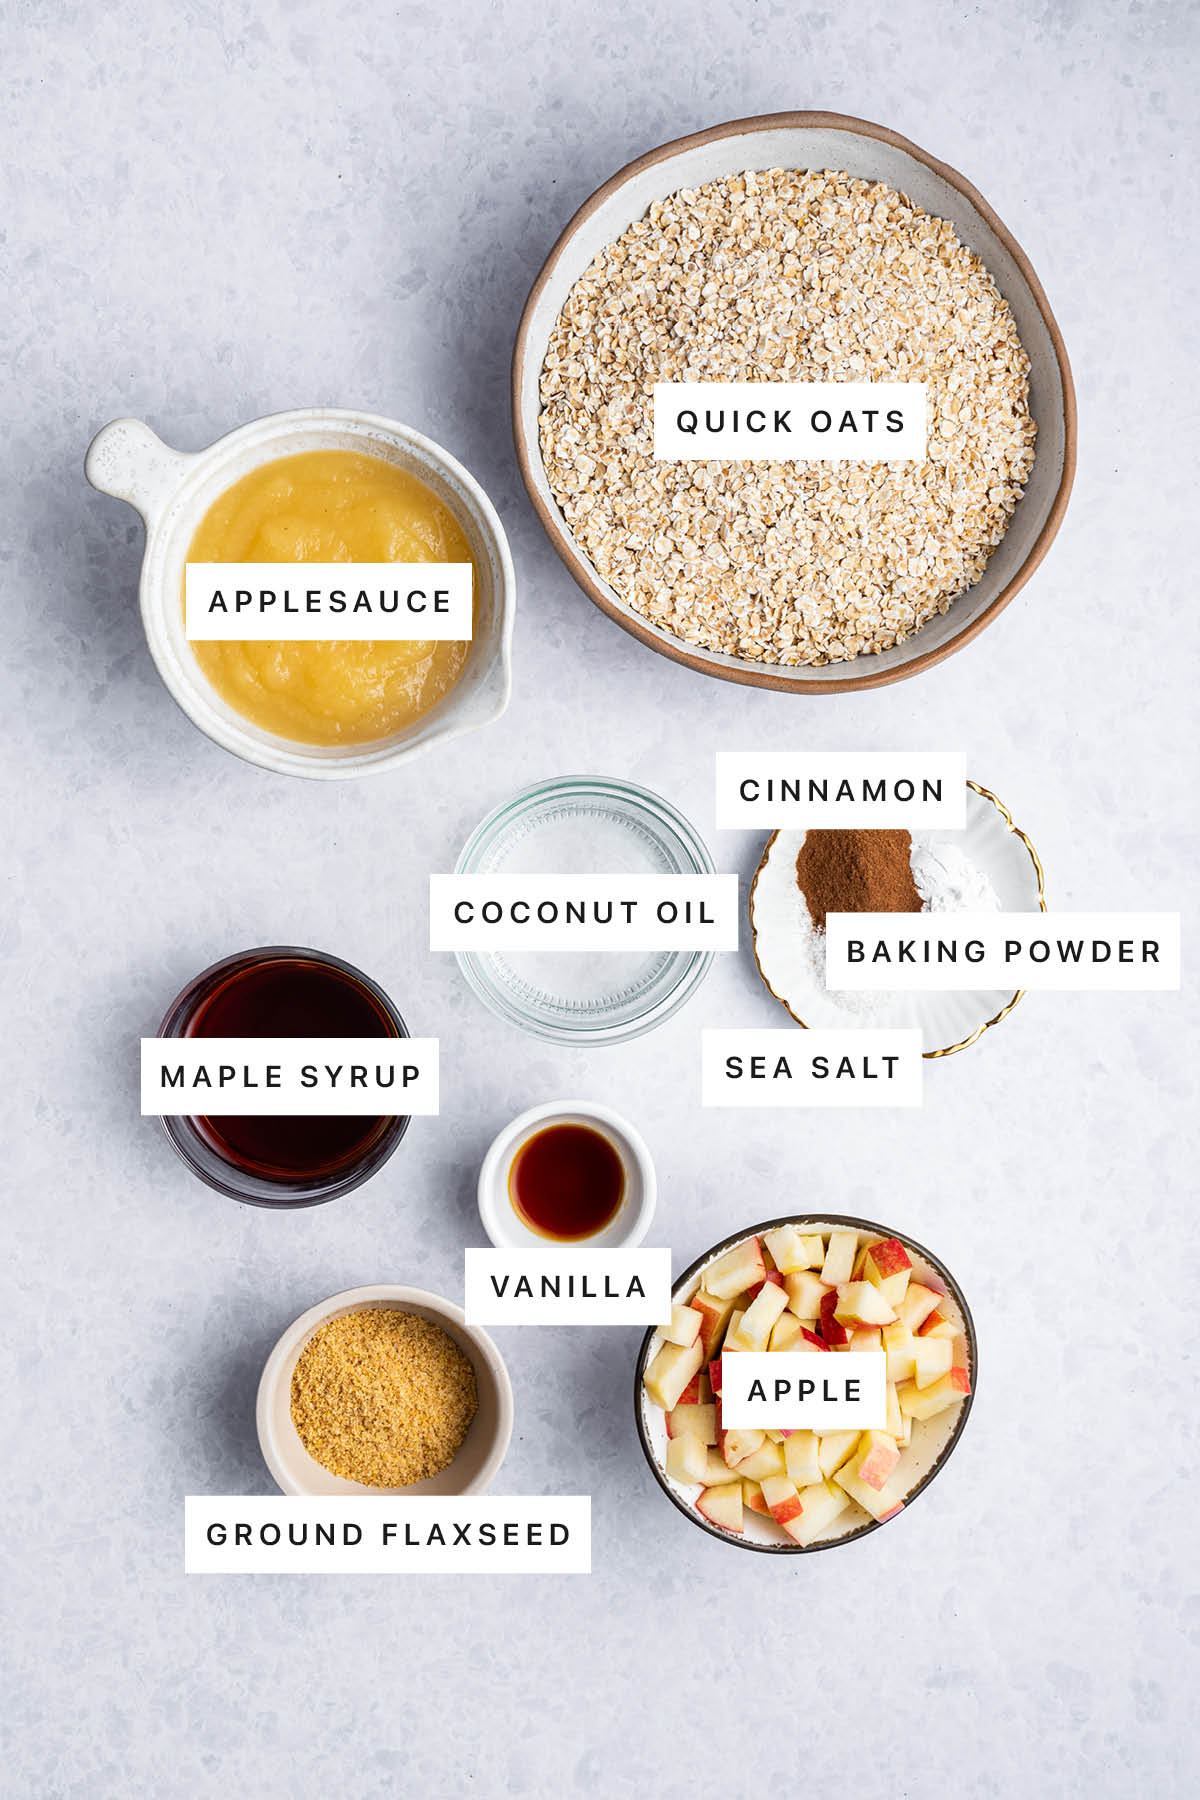 Ingredients measured out to make Apple Oatmeal Bars: applesauce, quick oats, coconut oil, cinnamon, baking powder, sea salt, maple syrup, vanilla, ground flaxseed and apple.